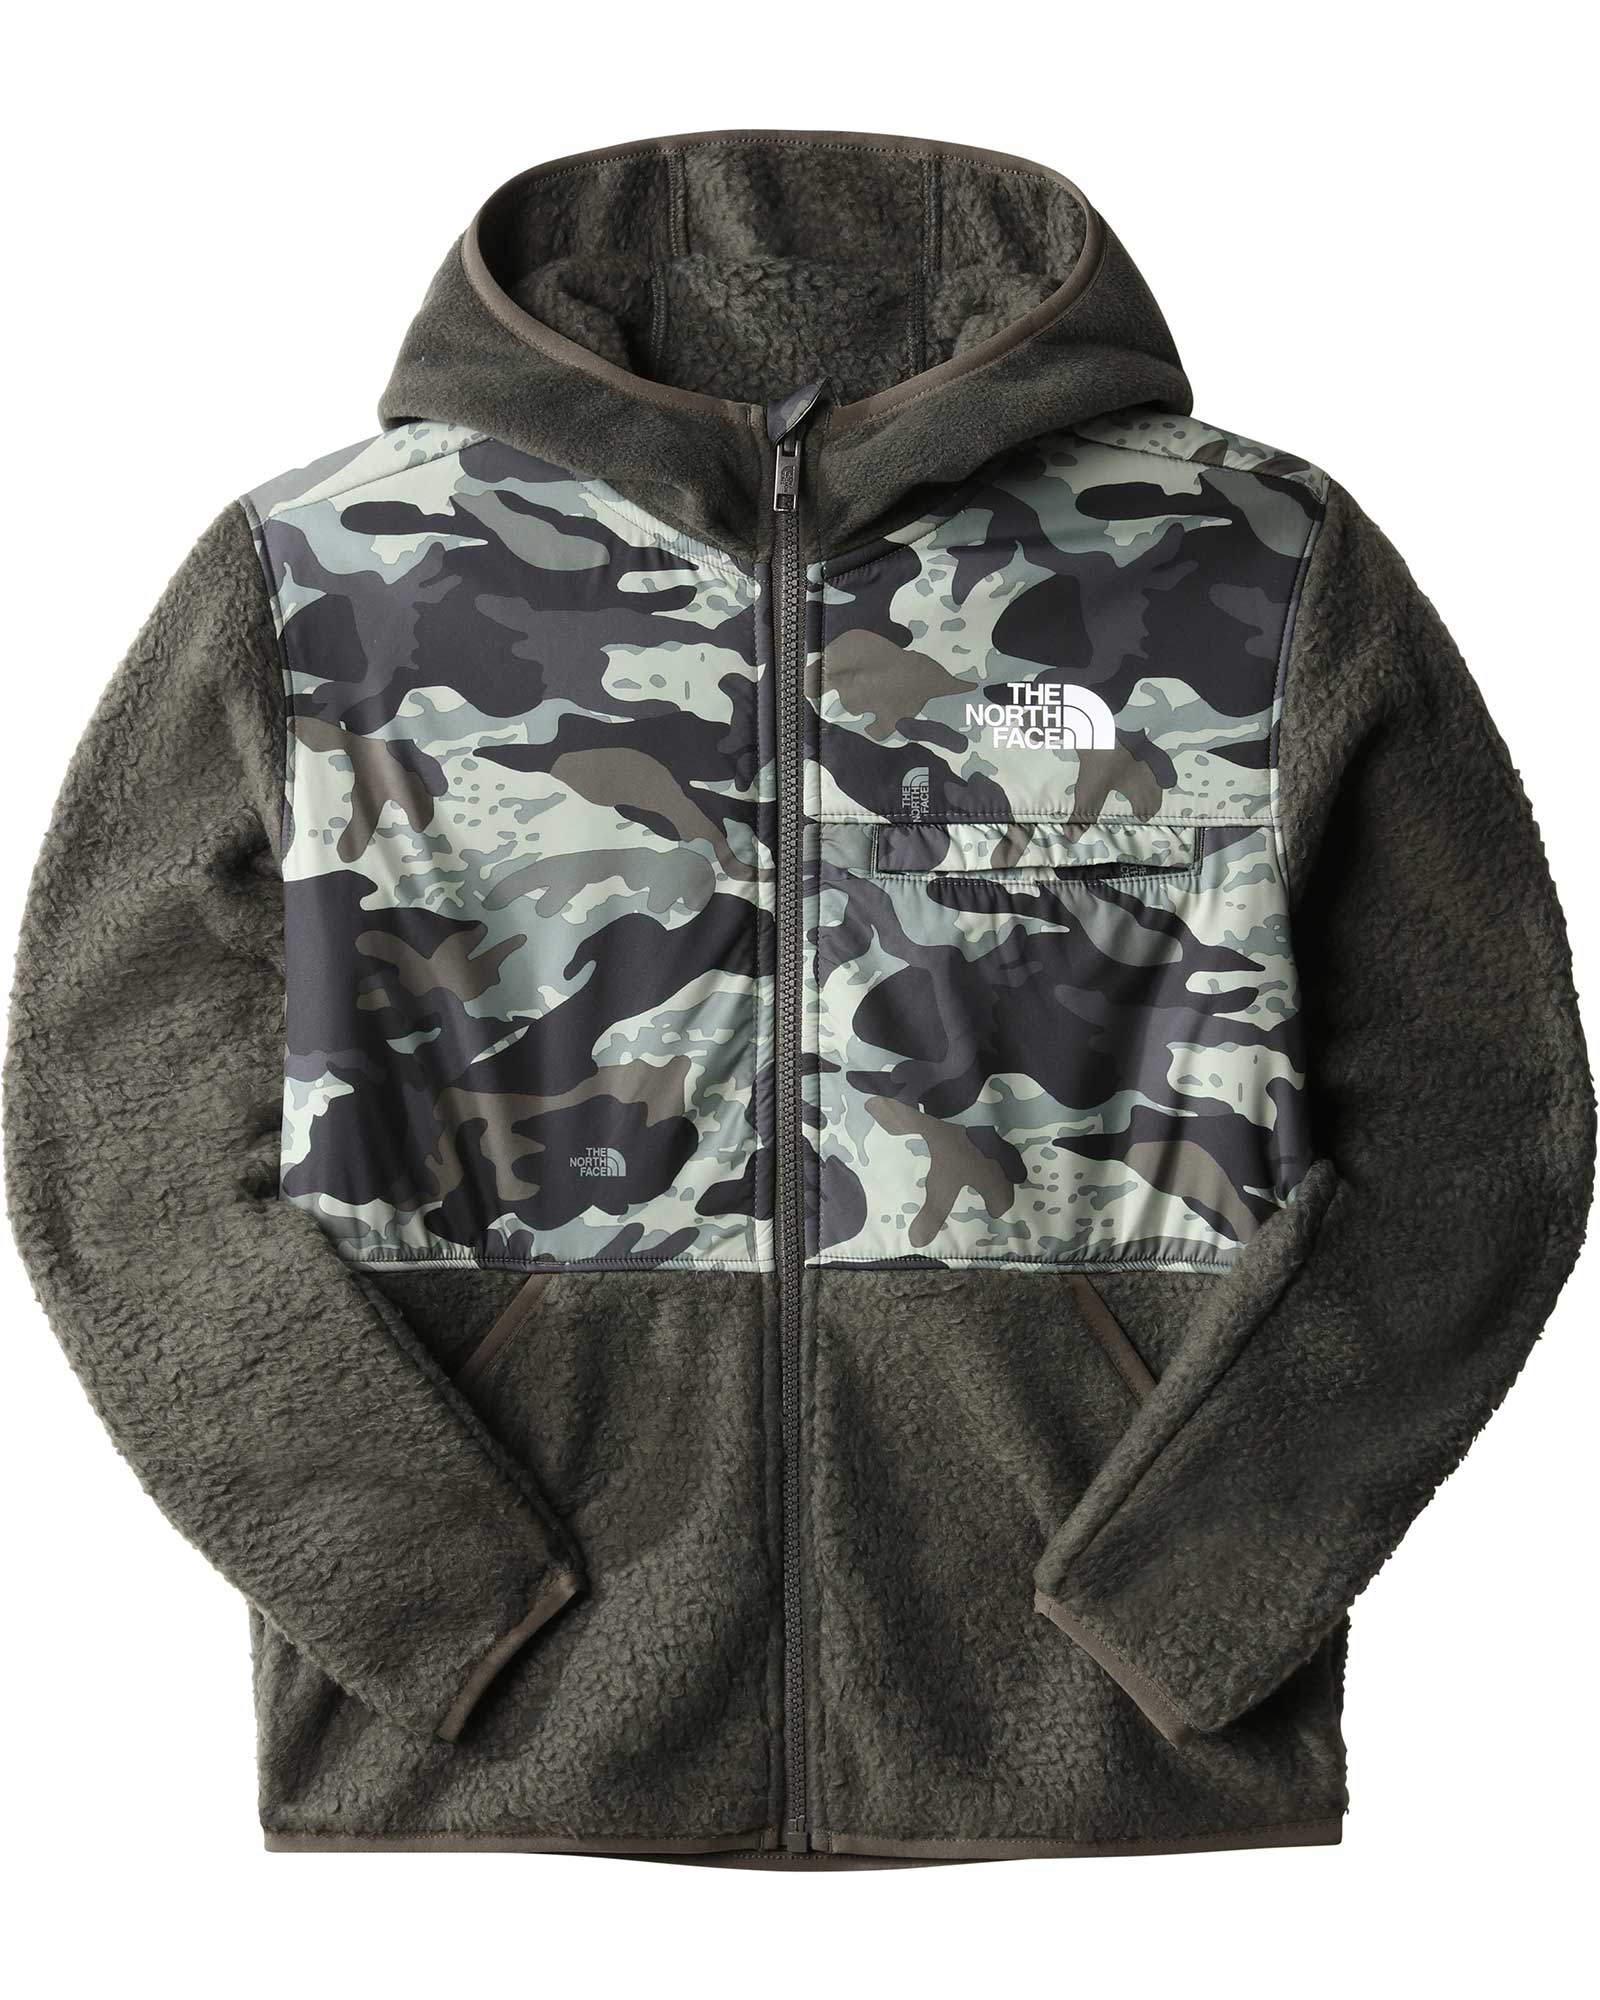 The North Face Forrest Kids’ Fleece Full Zip Hooded Jacket XL - New Taupe Green Camo XL